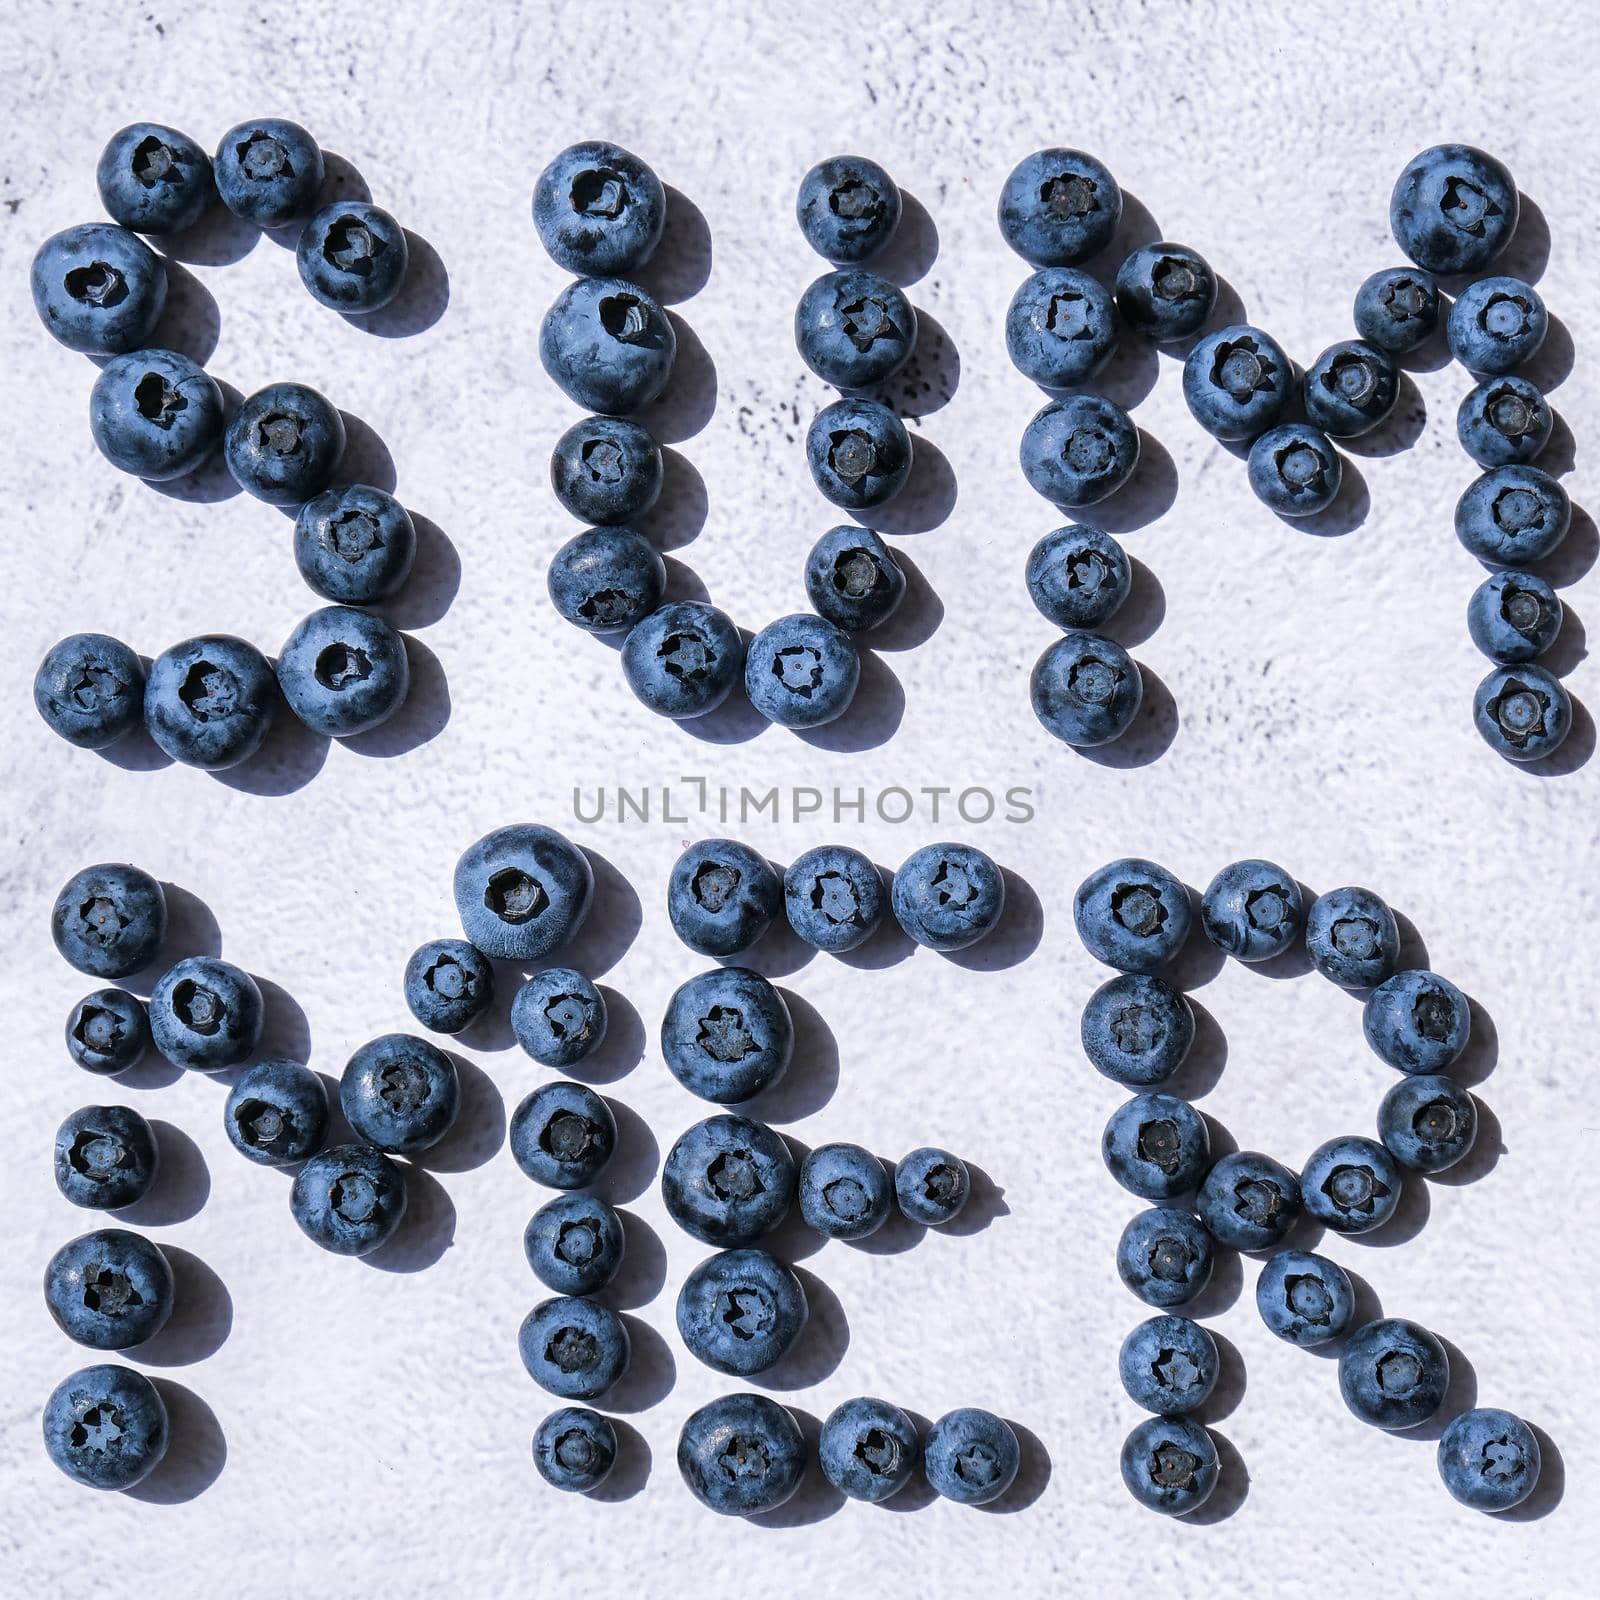 Summer inscription lined from blueberries. Fruits and berries, vegetarian and healthy eating concept. Summer text created from blueberries. Superfood. Healthy eating